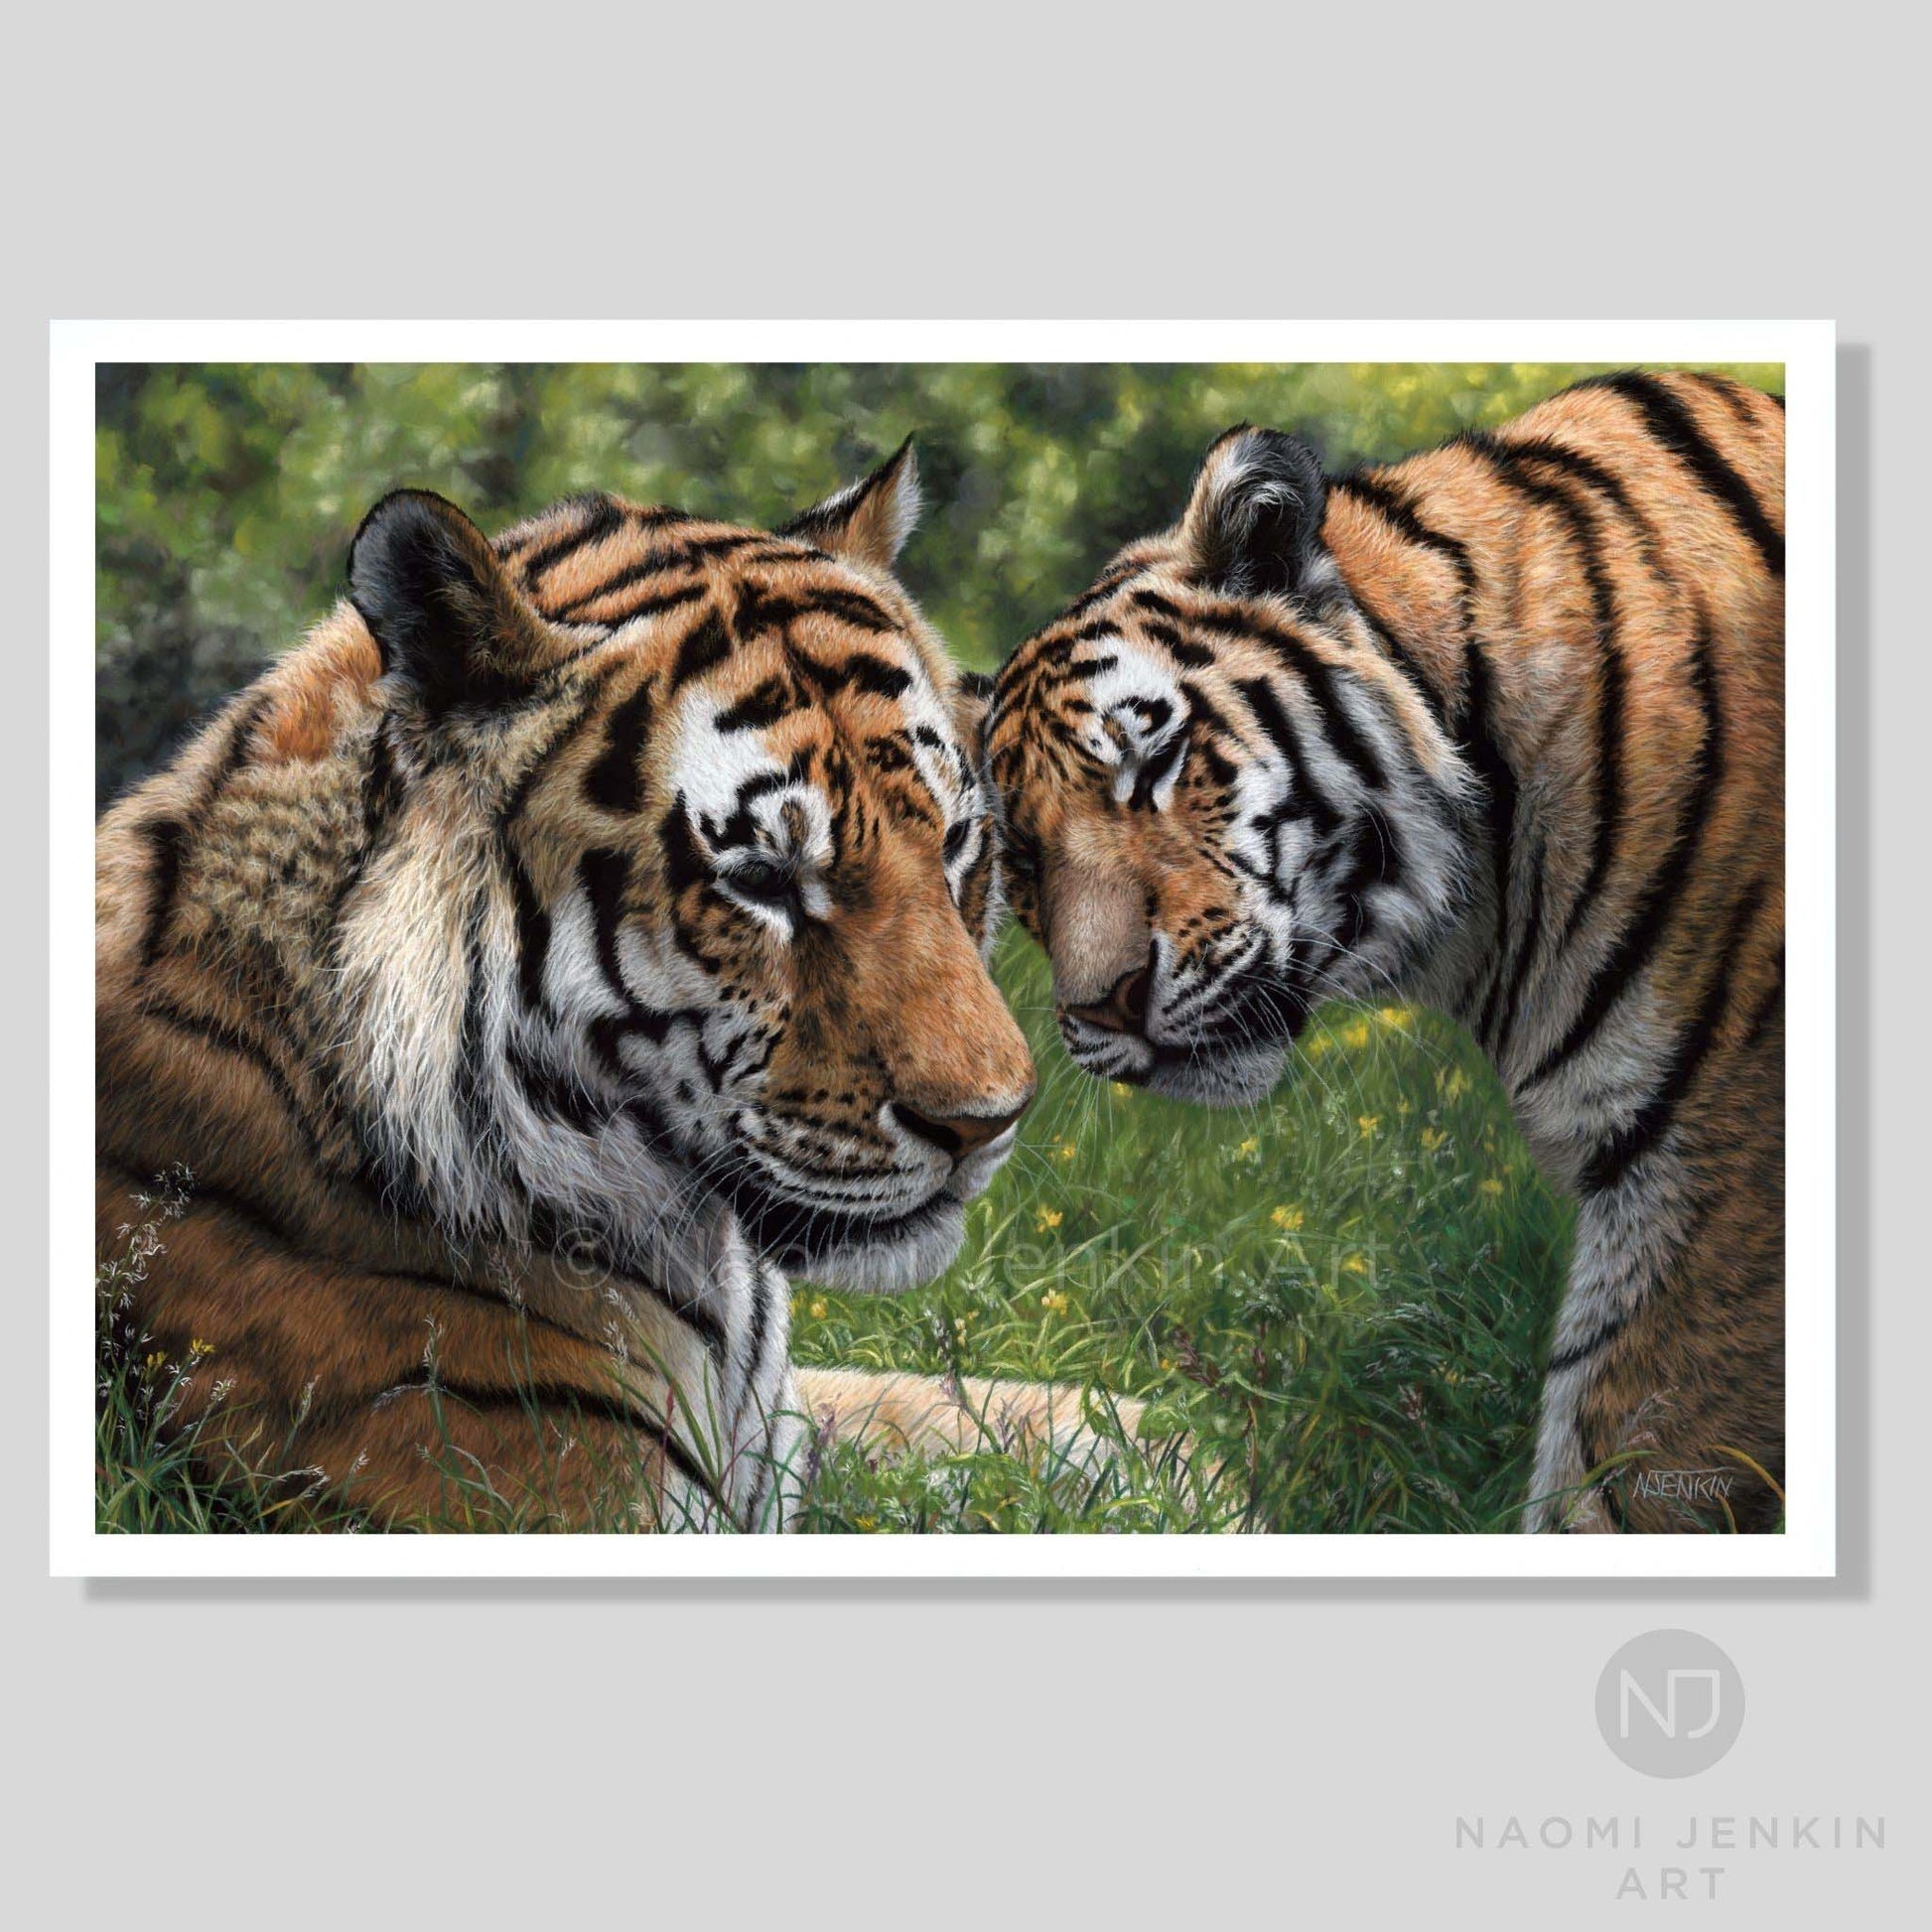 Tiger art print "Allegiance" produced from an original pastel painting by wildlife artist Naomi Jenkin